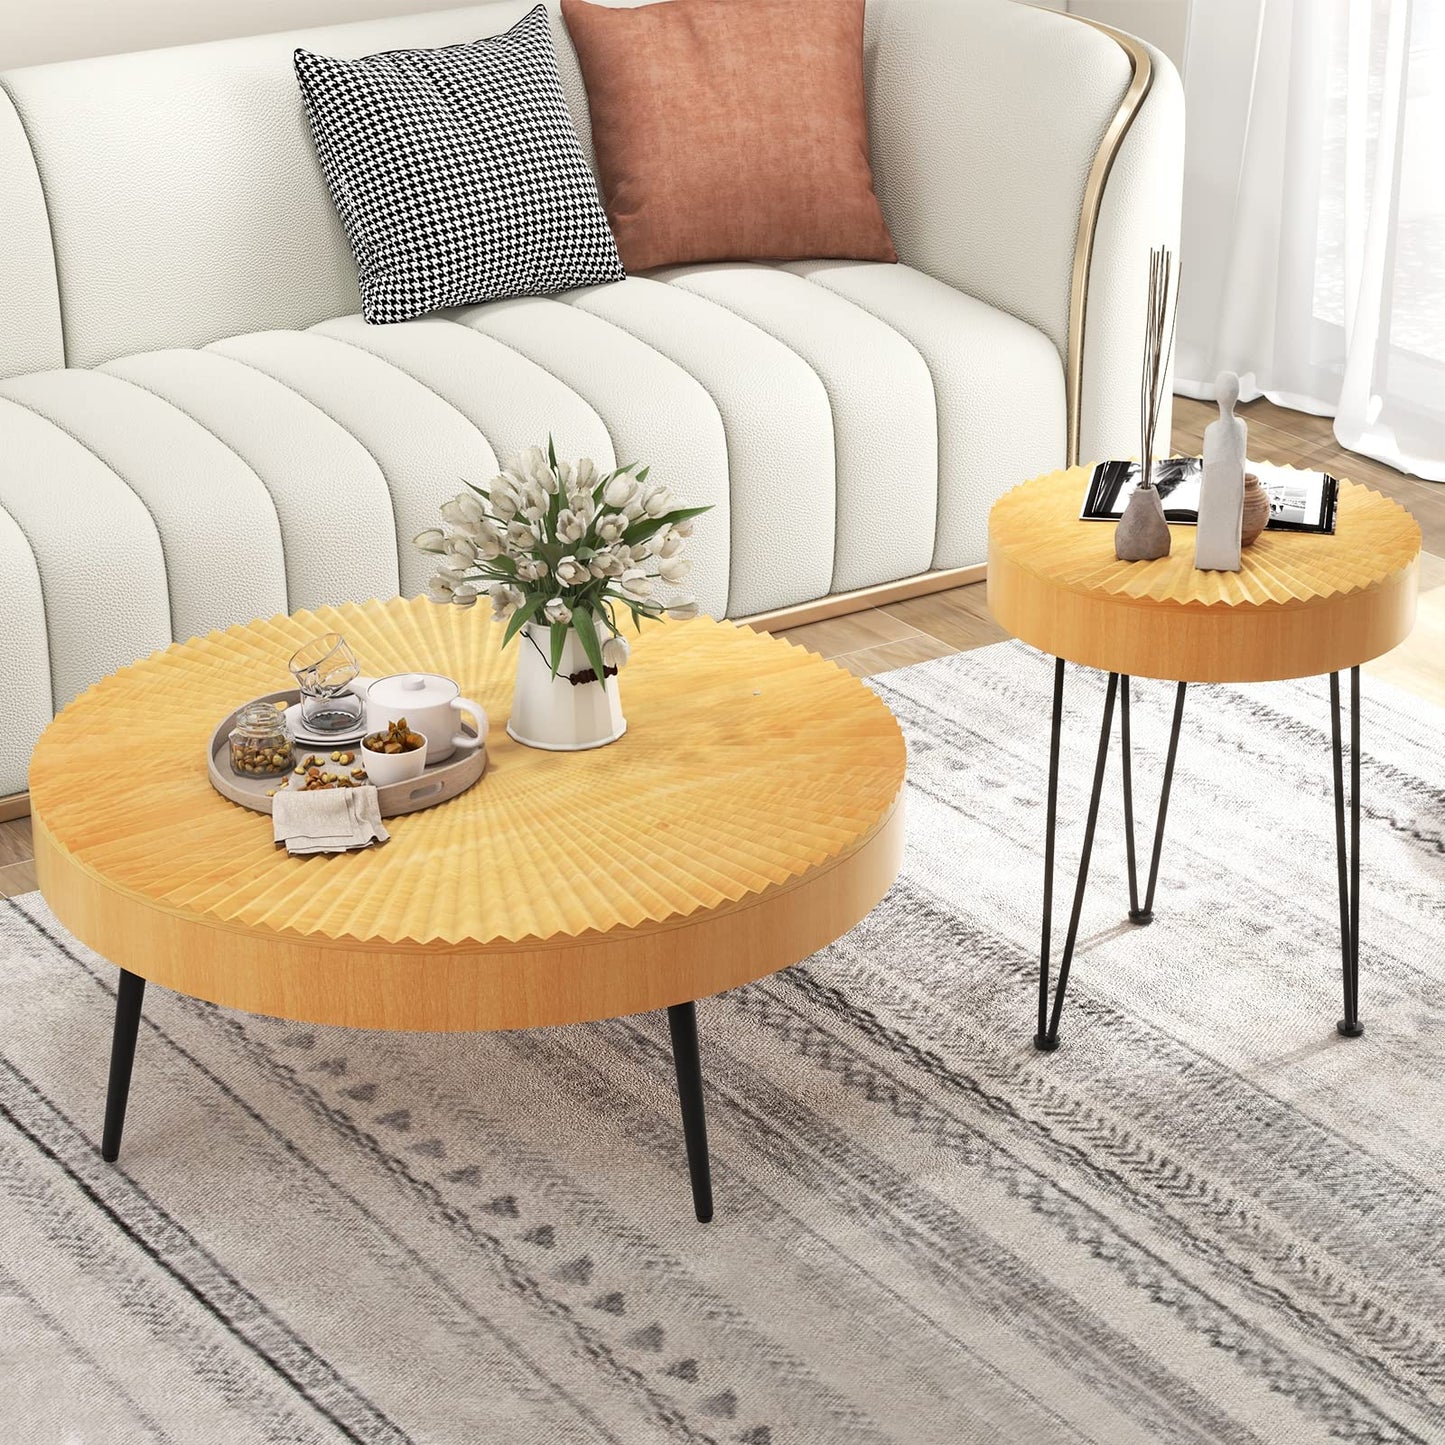 COSTWAY Farmhouse Round Coffee Table Set of 2, Rustic Sofa Side Tea Tables w/Wood Finish, Metal Frame, Adjustable Foot Pads, Nesting End Table Set for Living Room, Bedroom (Radial Pattern)